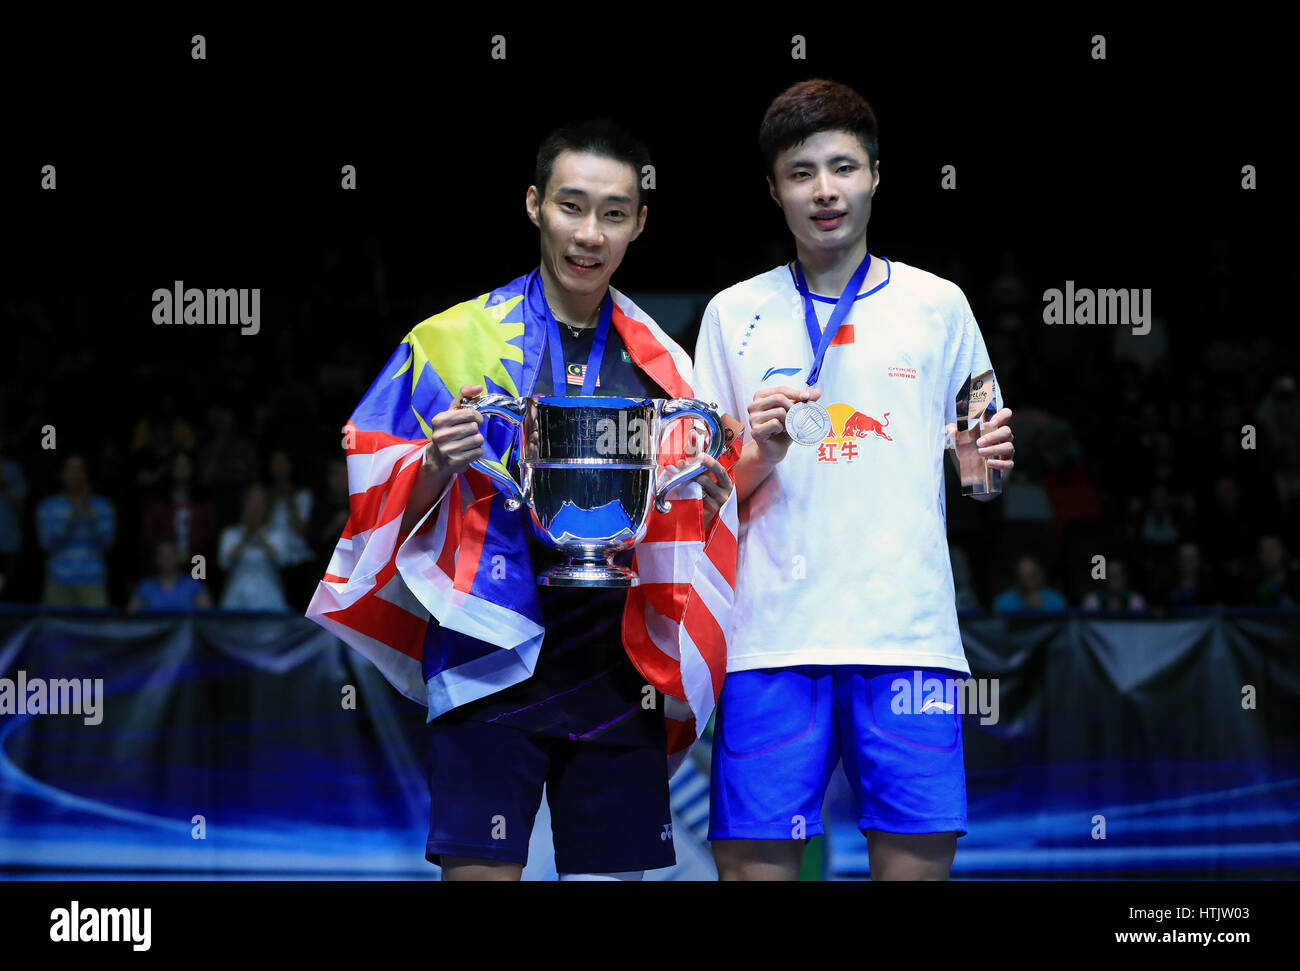 Malaysia's Chong Wei Lee (left) celebrates victory over China's Yuqi Shi on the podium in the Men's Singles Final during day six of the YONEX All England Open Badminton Championships at the Barclaycard Arena, Birmingham. Stock Photo